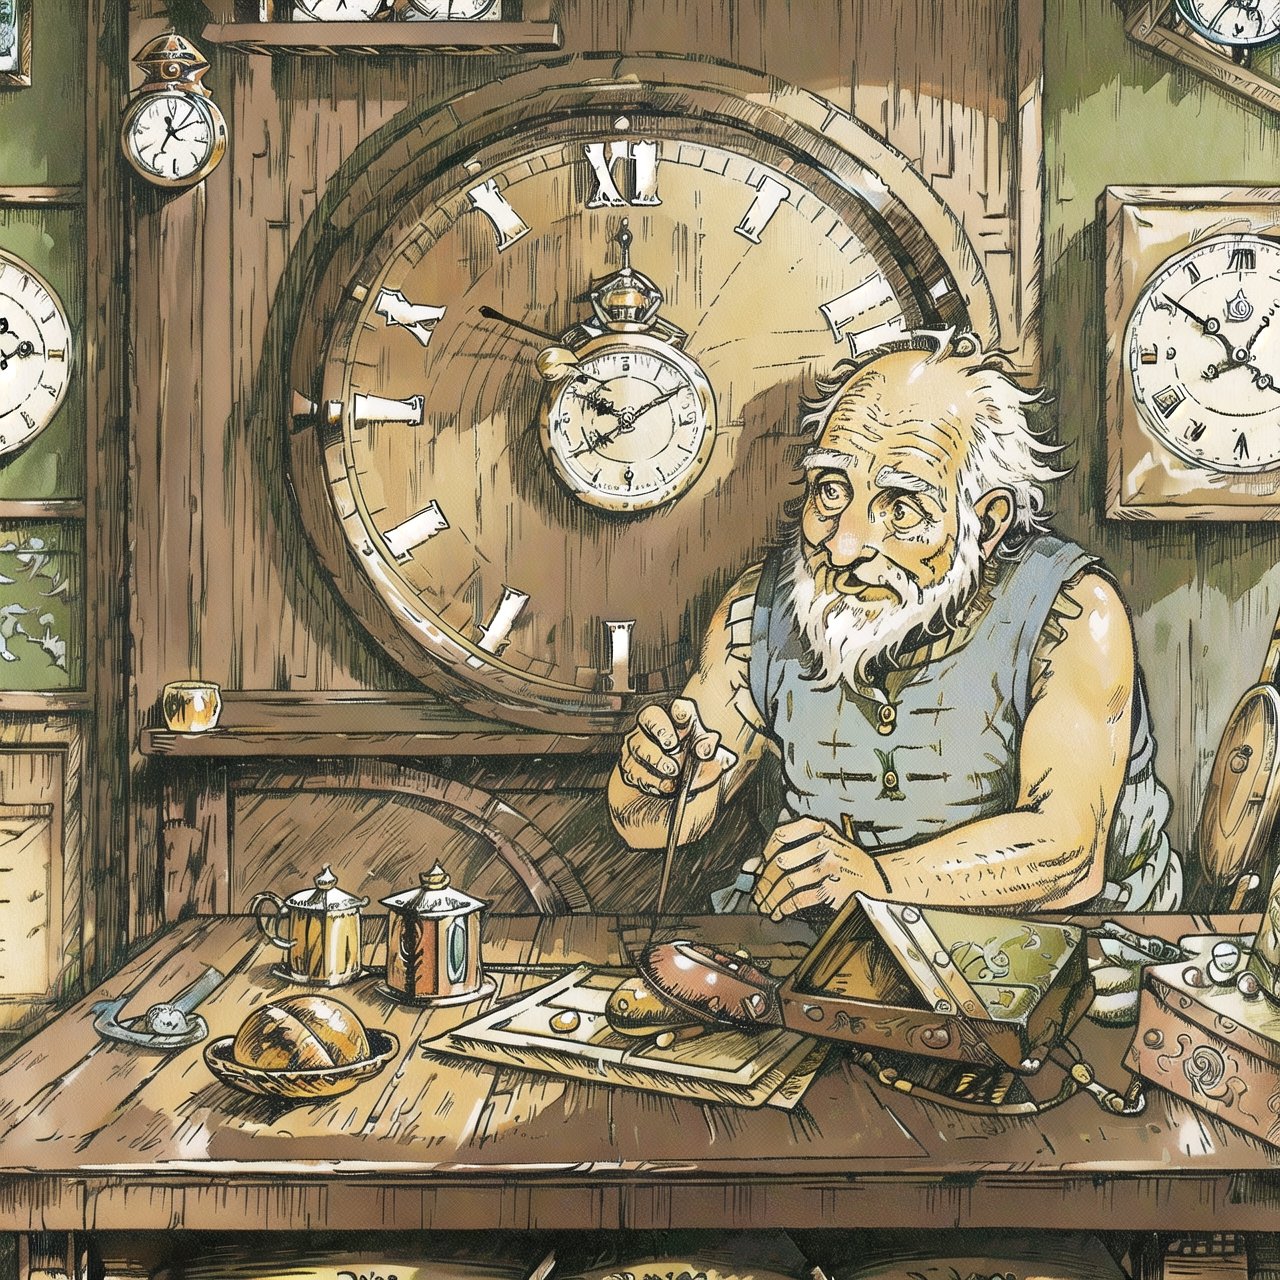 (masterpiece, best quality:1.3), 8k resolution, rup3rt_Style, solo, old man, old, beard, workshop, working, hands up, tunic, sleeveless, table, clock, indoors, extremely detailed background, finely detailed face, looking down, smile, weathered, warm tone, (fantasy illustration:1.3)